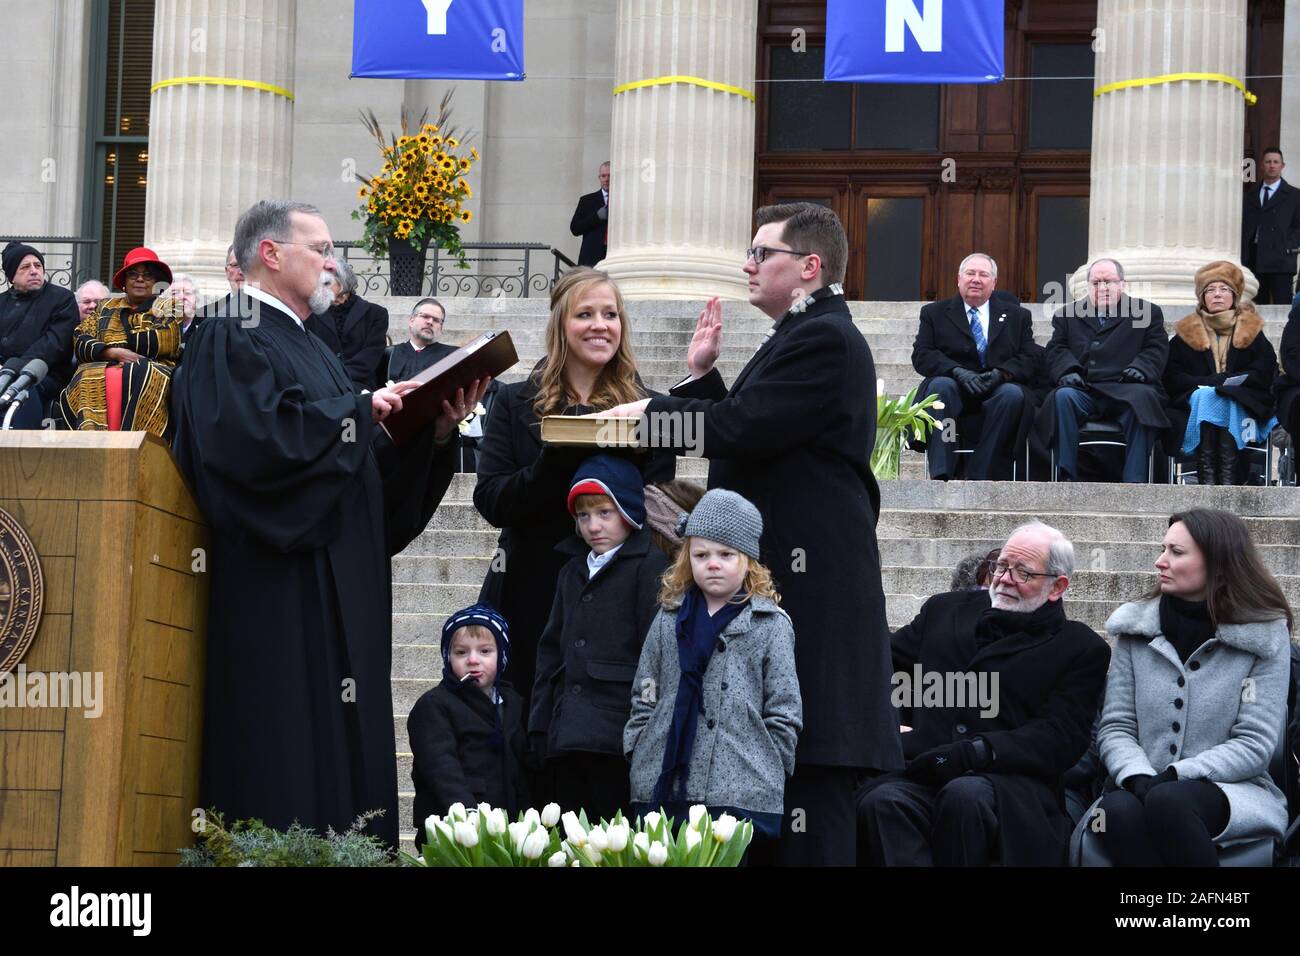 Topeka, Kansas, USA, January 14, 2019Democrat Governor Laura Kelly delivers her inaugural speech is front of the steps of the Kansas State Capitol buildingTopeka, Kansas, USA, January 14, 2019 Kansas State Treasurer Jake Laturner with his wife Suzanne holding the Bible as Chief Justice of the Kansas Supreme Court Lawton Nuss administers the oath of office while his children Ava, Joe, Maggie, and Gus stand and watch Credit: Mark Reinstein/MediaPunch Stock Photo